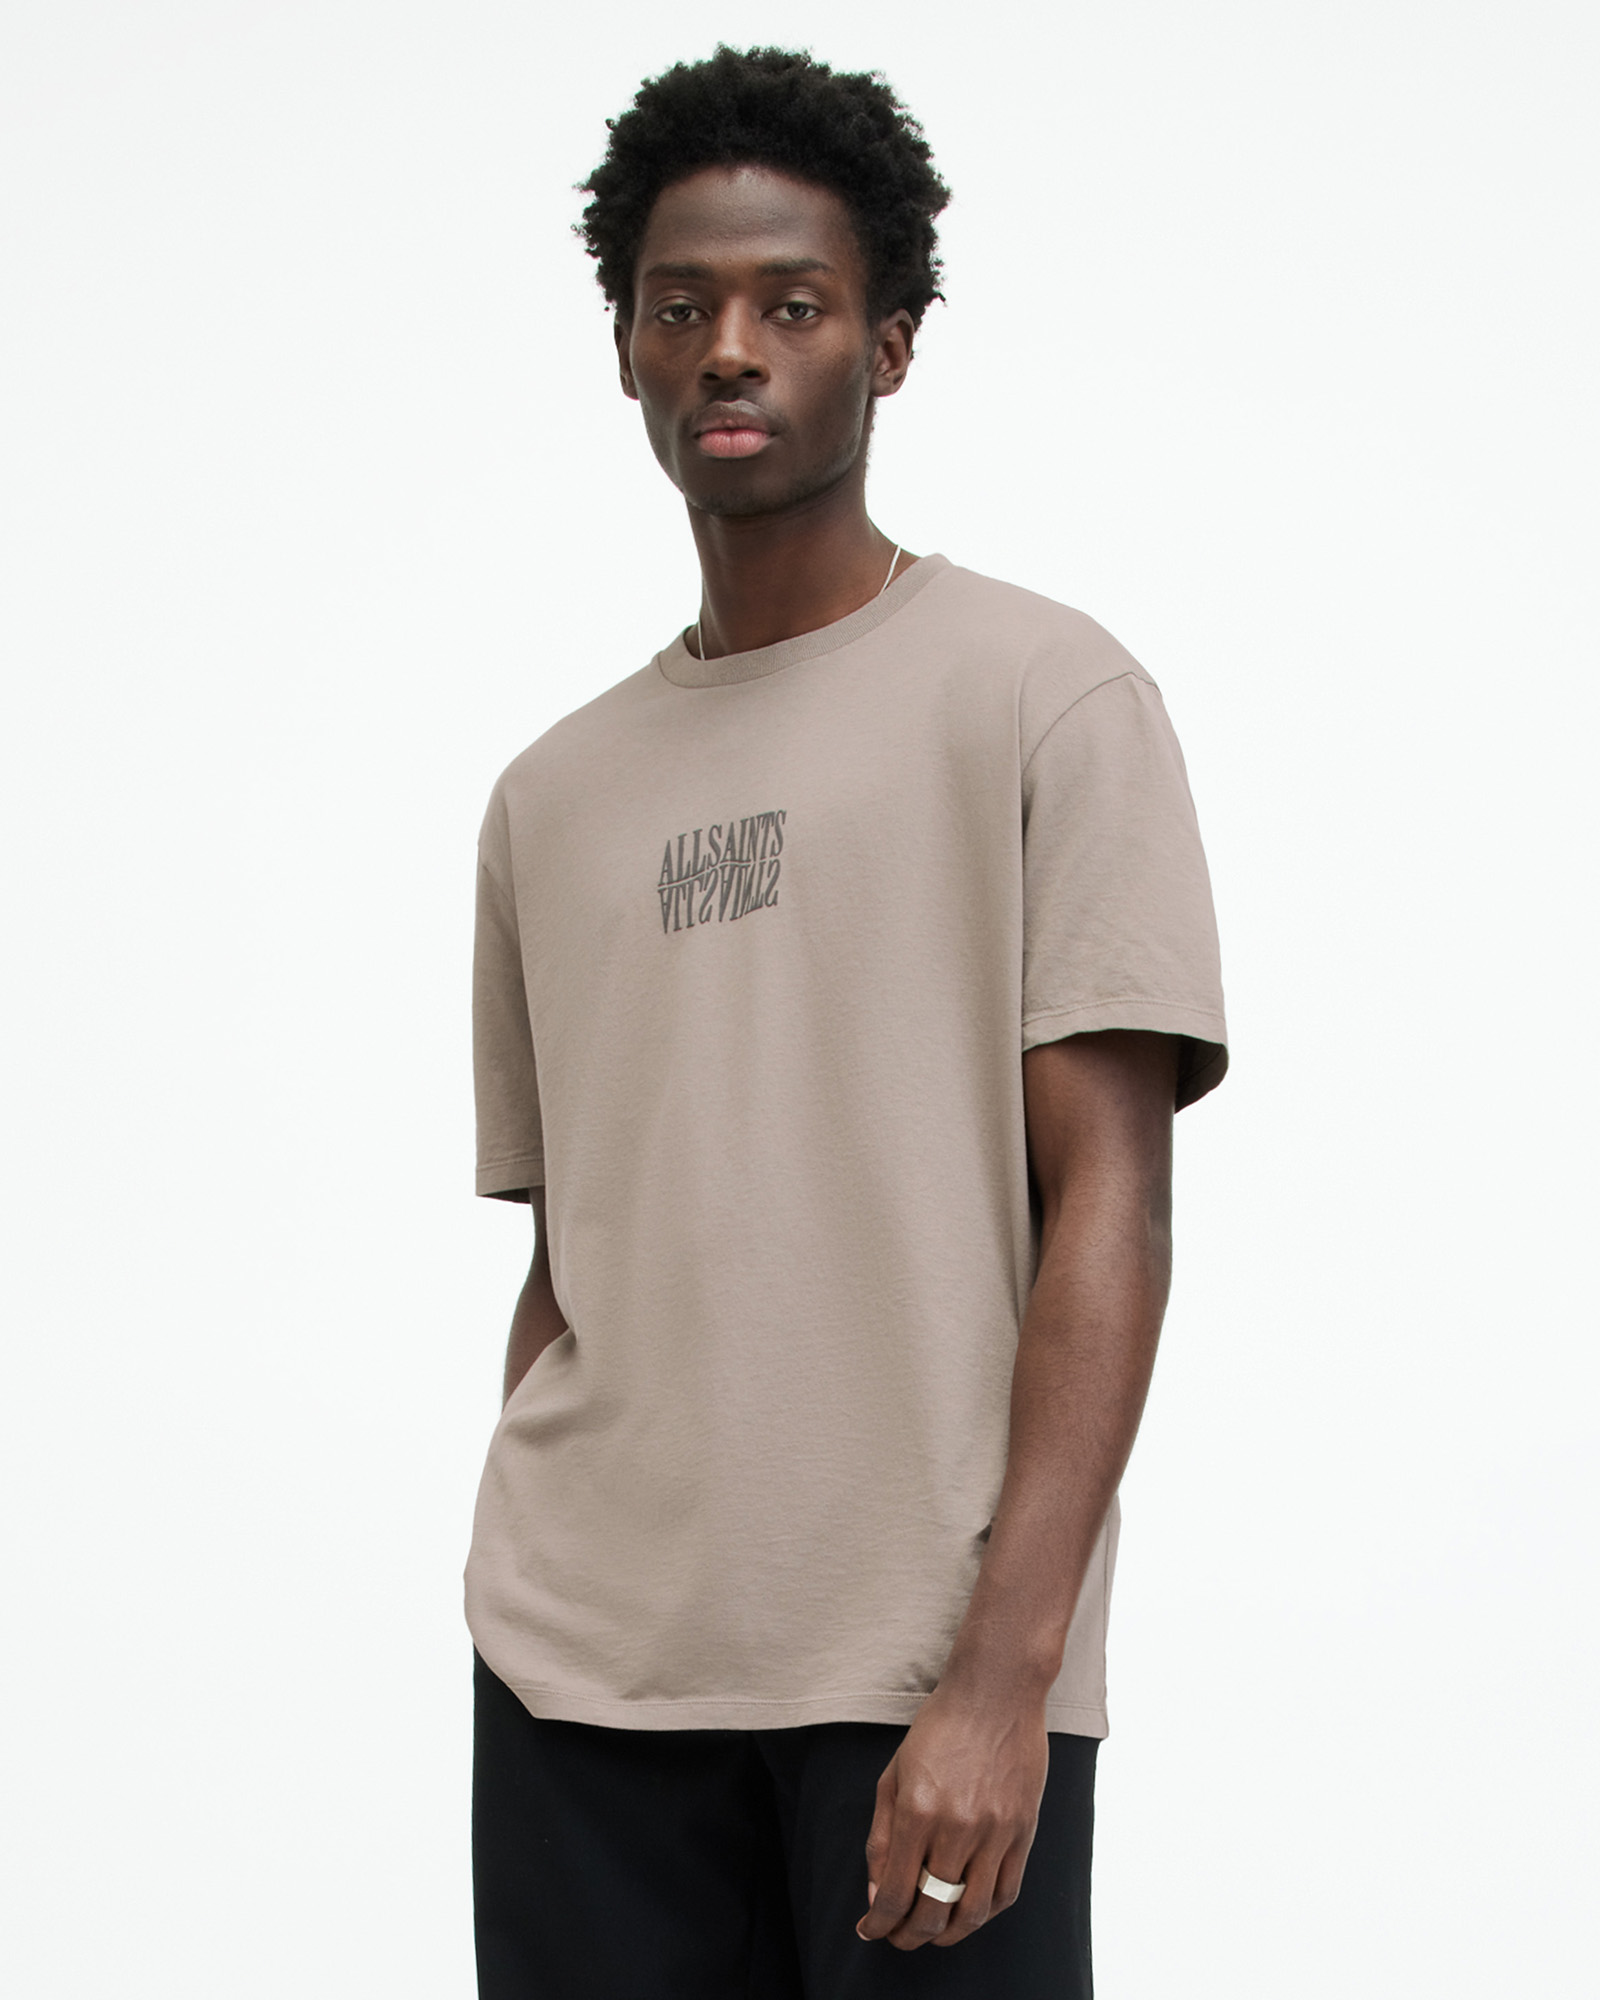 AllSaints Varden Relaxed Fit Warped Logo T-Shirt,, CHESTNUT TAUPE